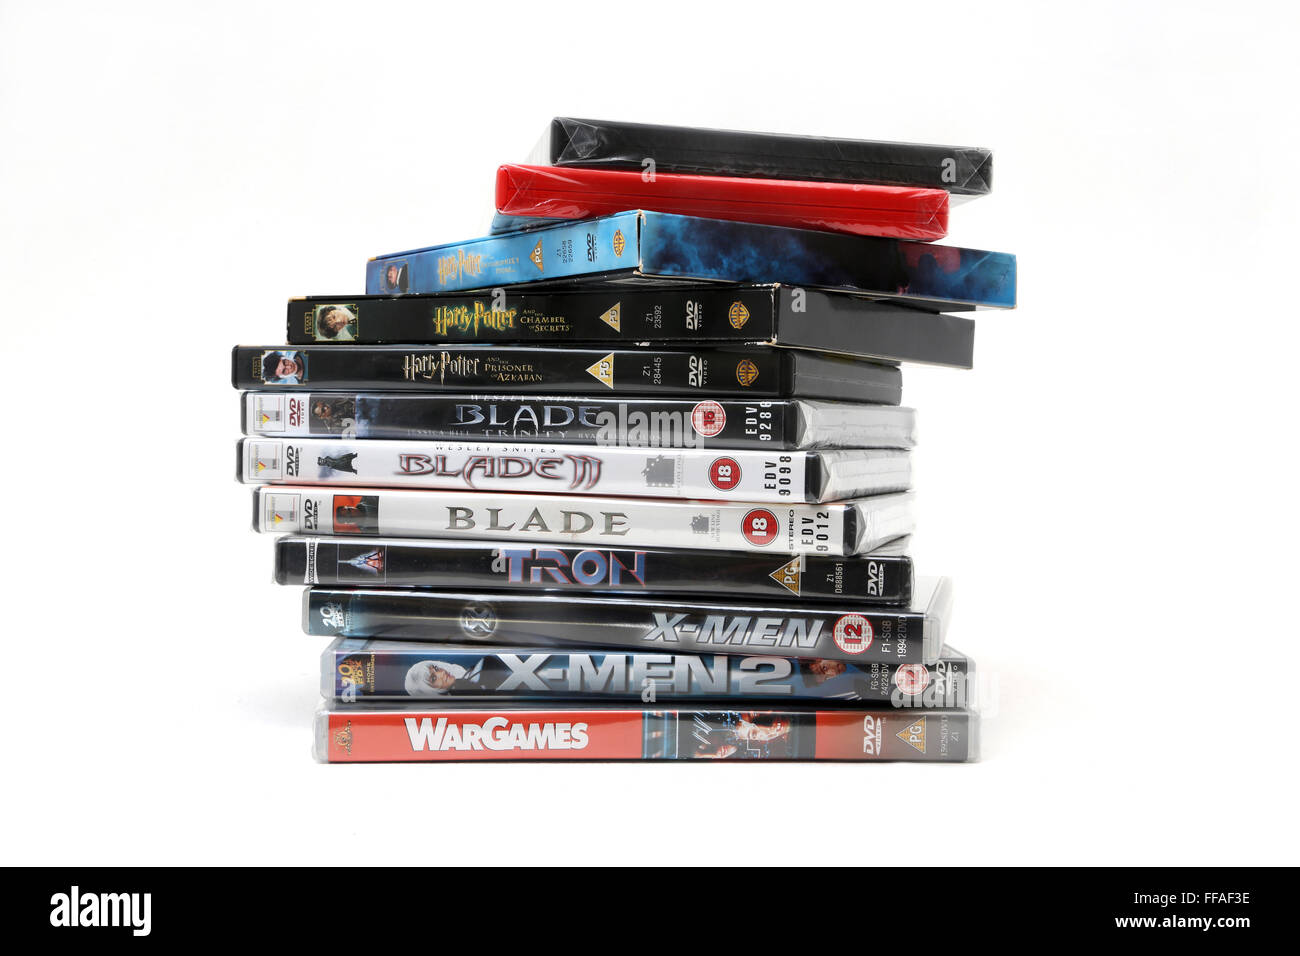 A Pile Of DVDs Harry Potter, Blade Trilogy, Tron, X-Men And X-Men 2 And Wargames Stock Photo